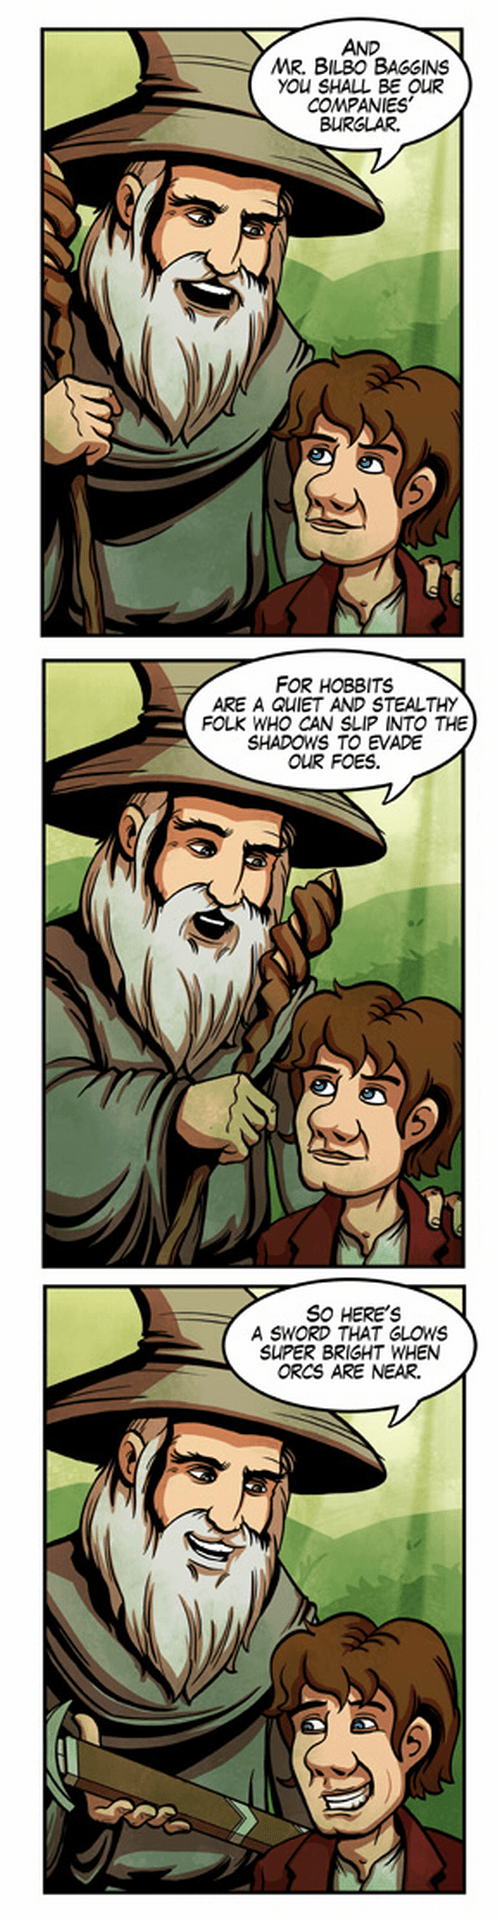 Gandalf’s plan to send this hobbit to his death [Comic] | dotTech